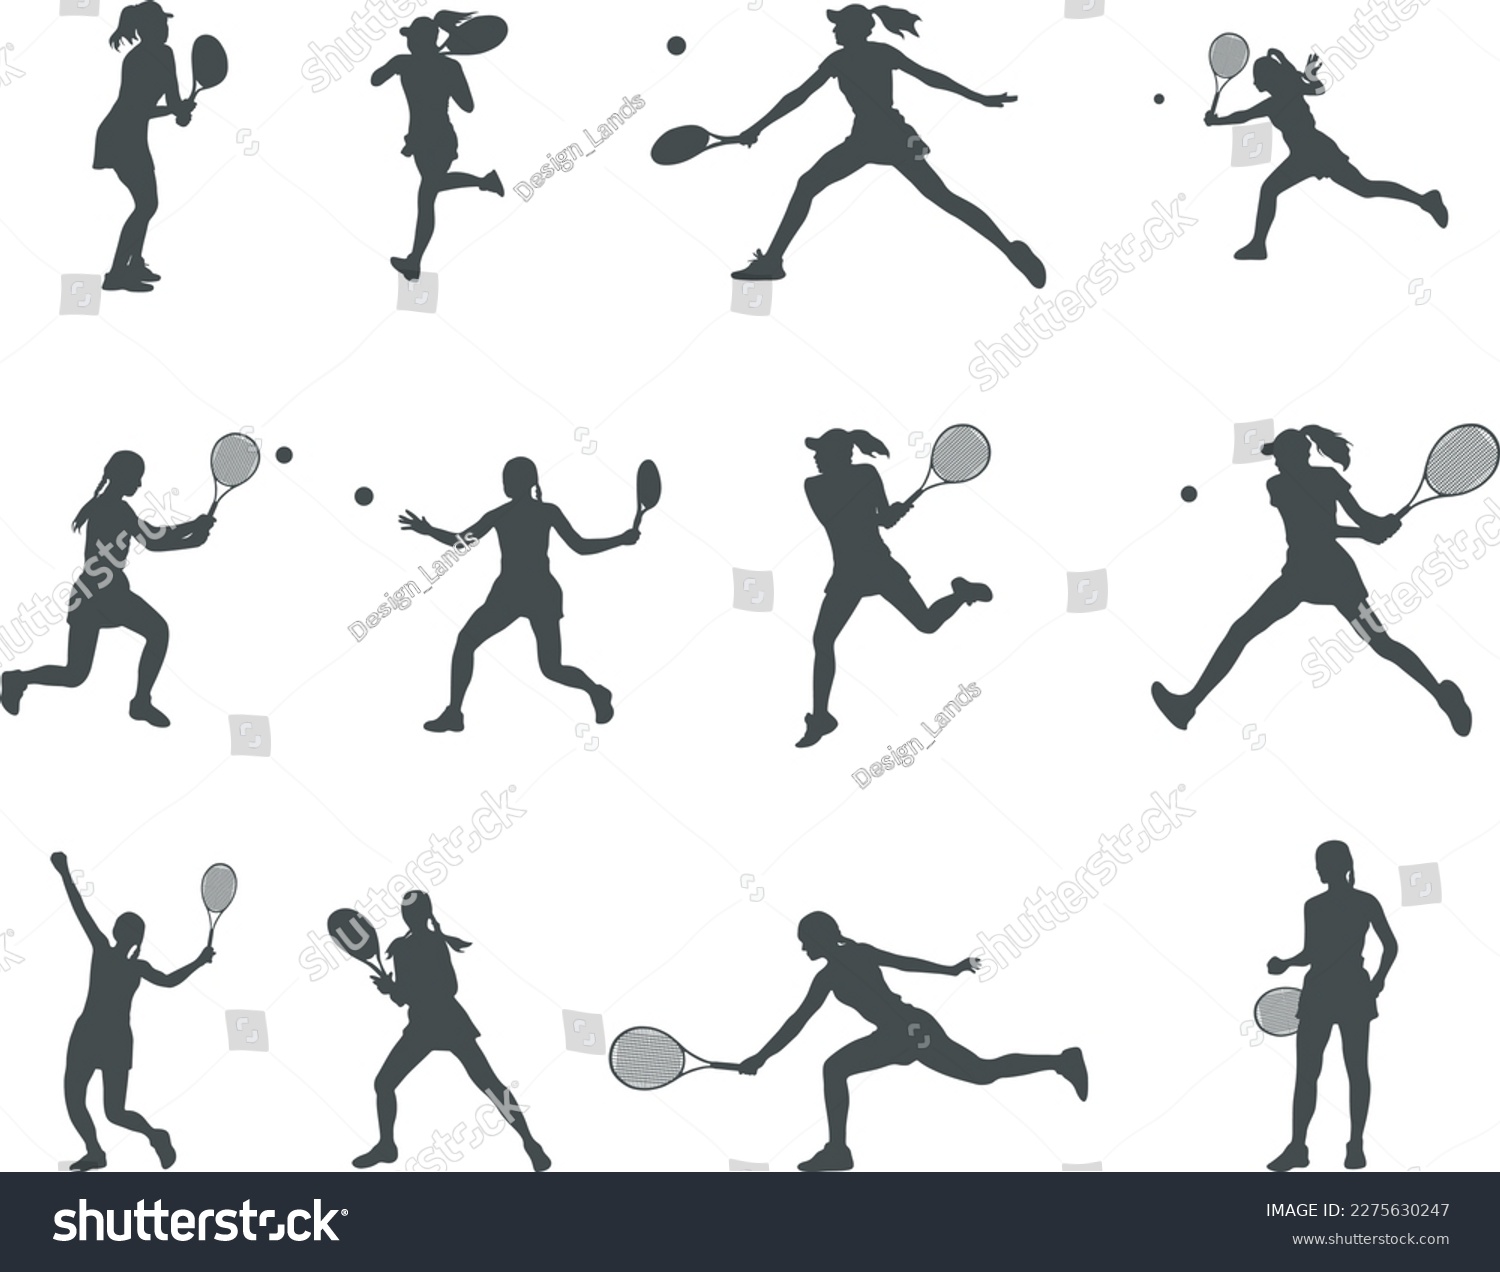 SVG of Female tennis player silhouettes, Tennis player silhouette, Woman tennis player vector, Tennis player SVG svg